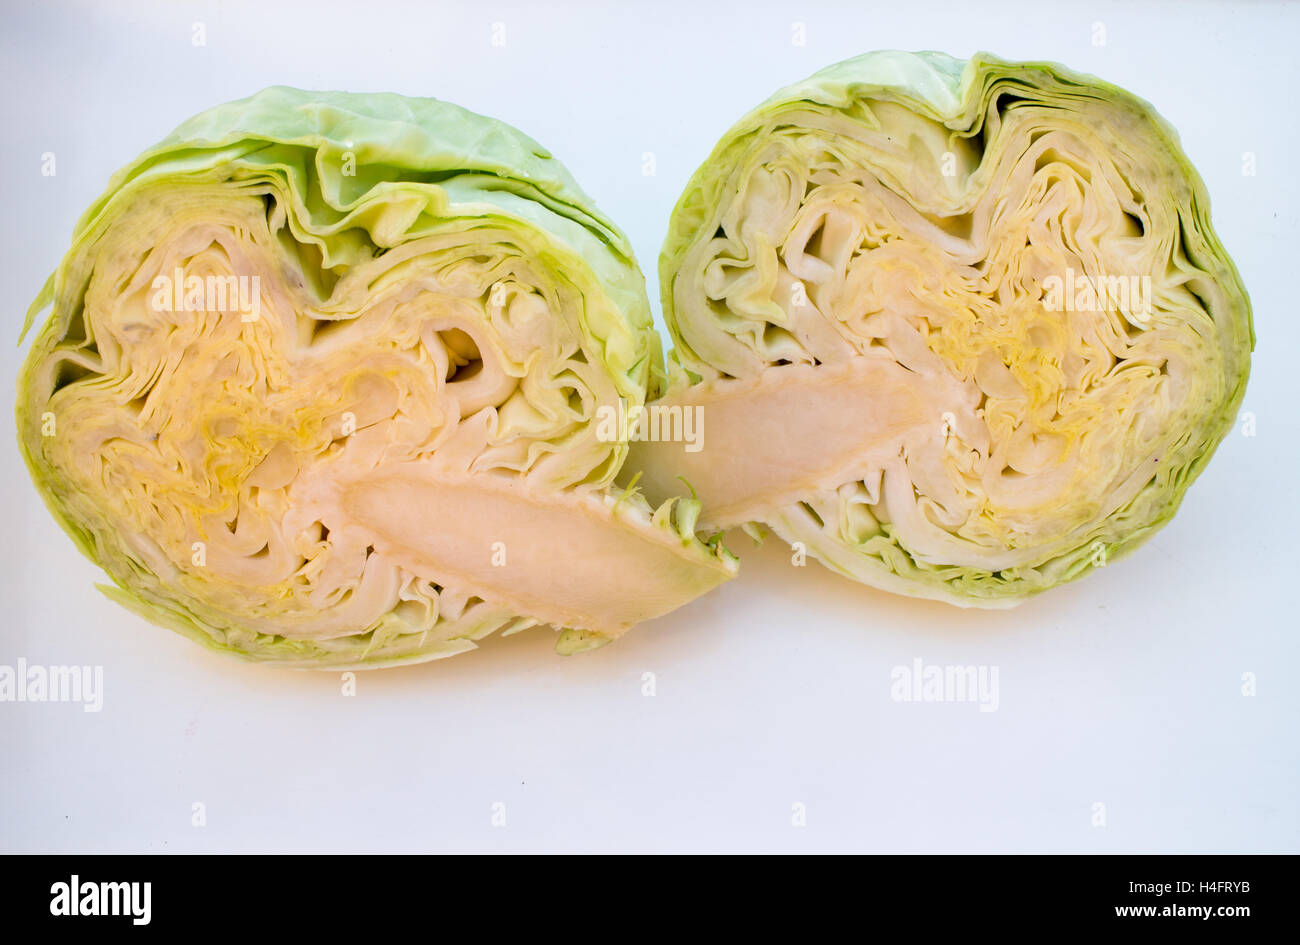 A whole green cabbage cut in half to use in your kitchen, food inspired Stock Photo